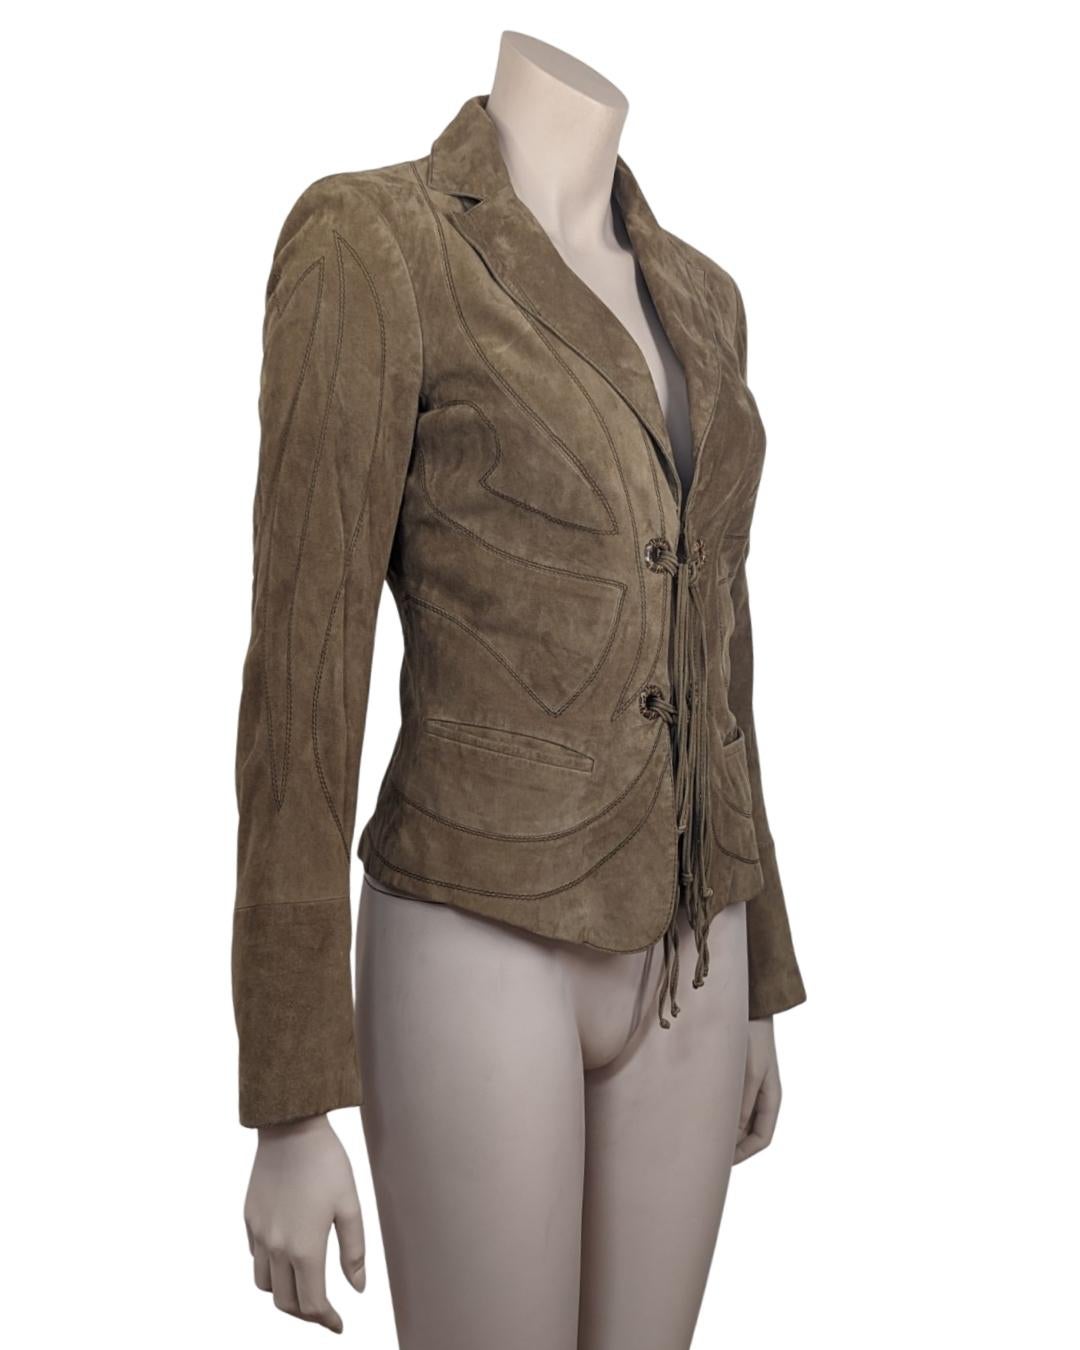 Roberto Cavalli Butterfly Suede Leather Jacket For Sale 2